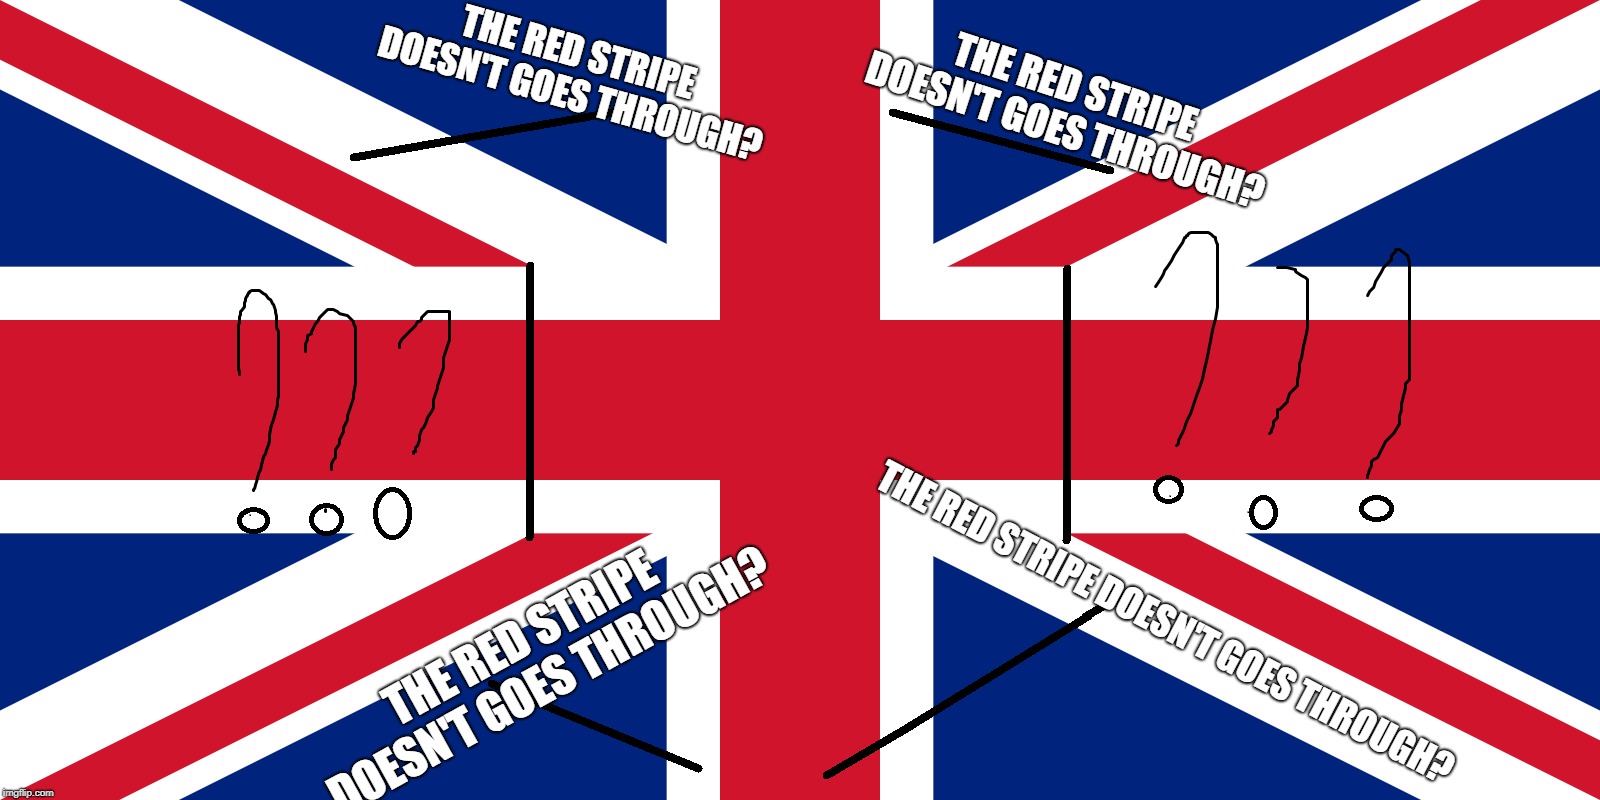 Everything Wrong About United Kingdom's Flags |  THE RED STRIPE DOESN'T GOES THROUGH? THE RED STRIPE DOESN'T GOES THROUGH? THE RED STRIPE DOESN'T GOES THROUGH? THE RED STRIPE DOESN'T GOES THROUGH? | image tagged in memes,united kingdom | made w/ Imgflip meme maker